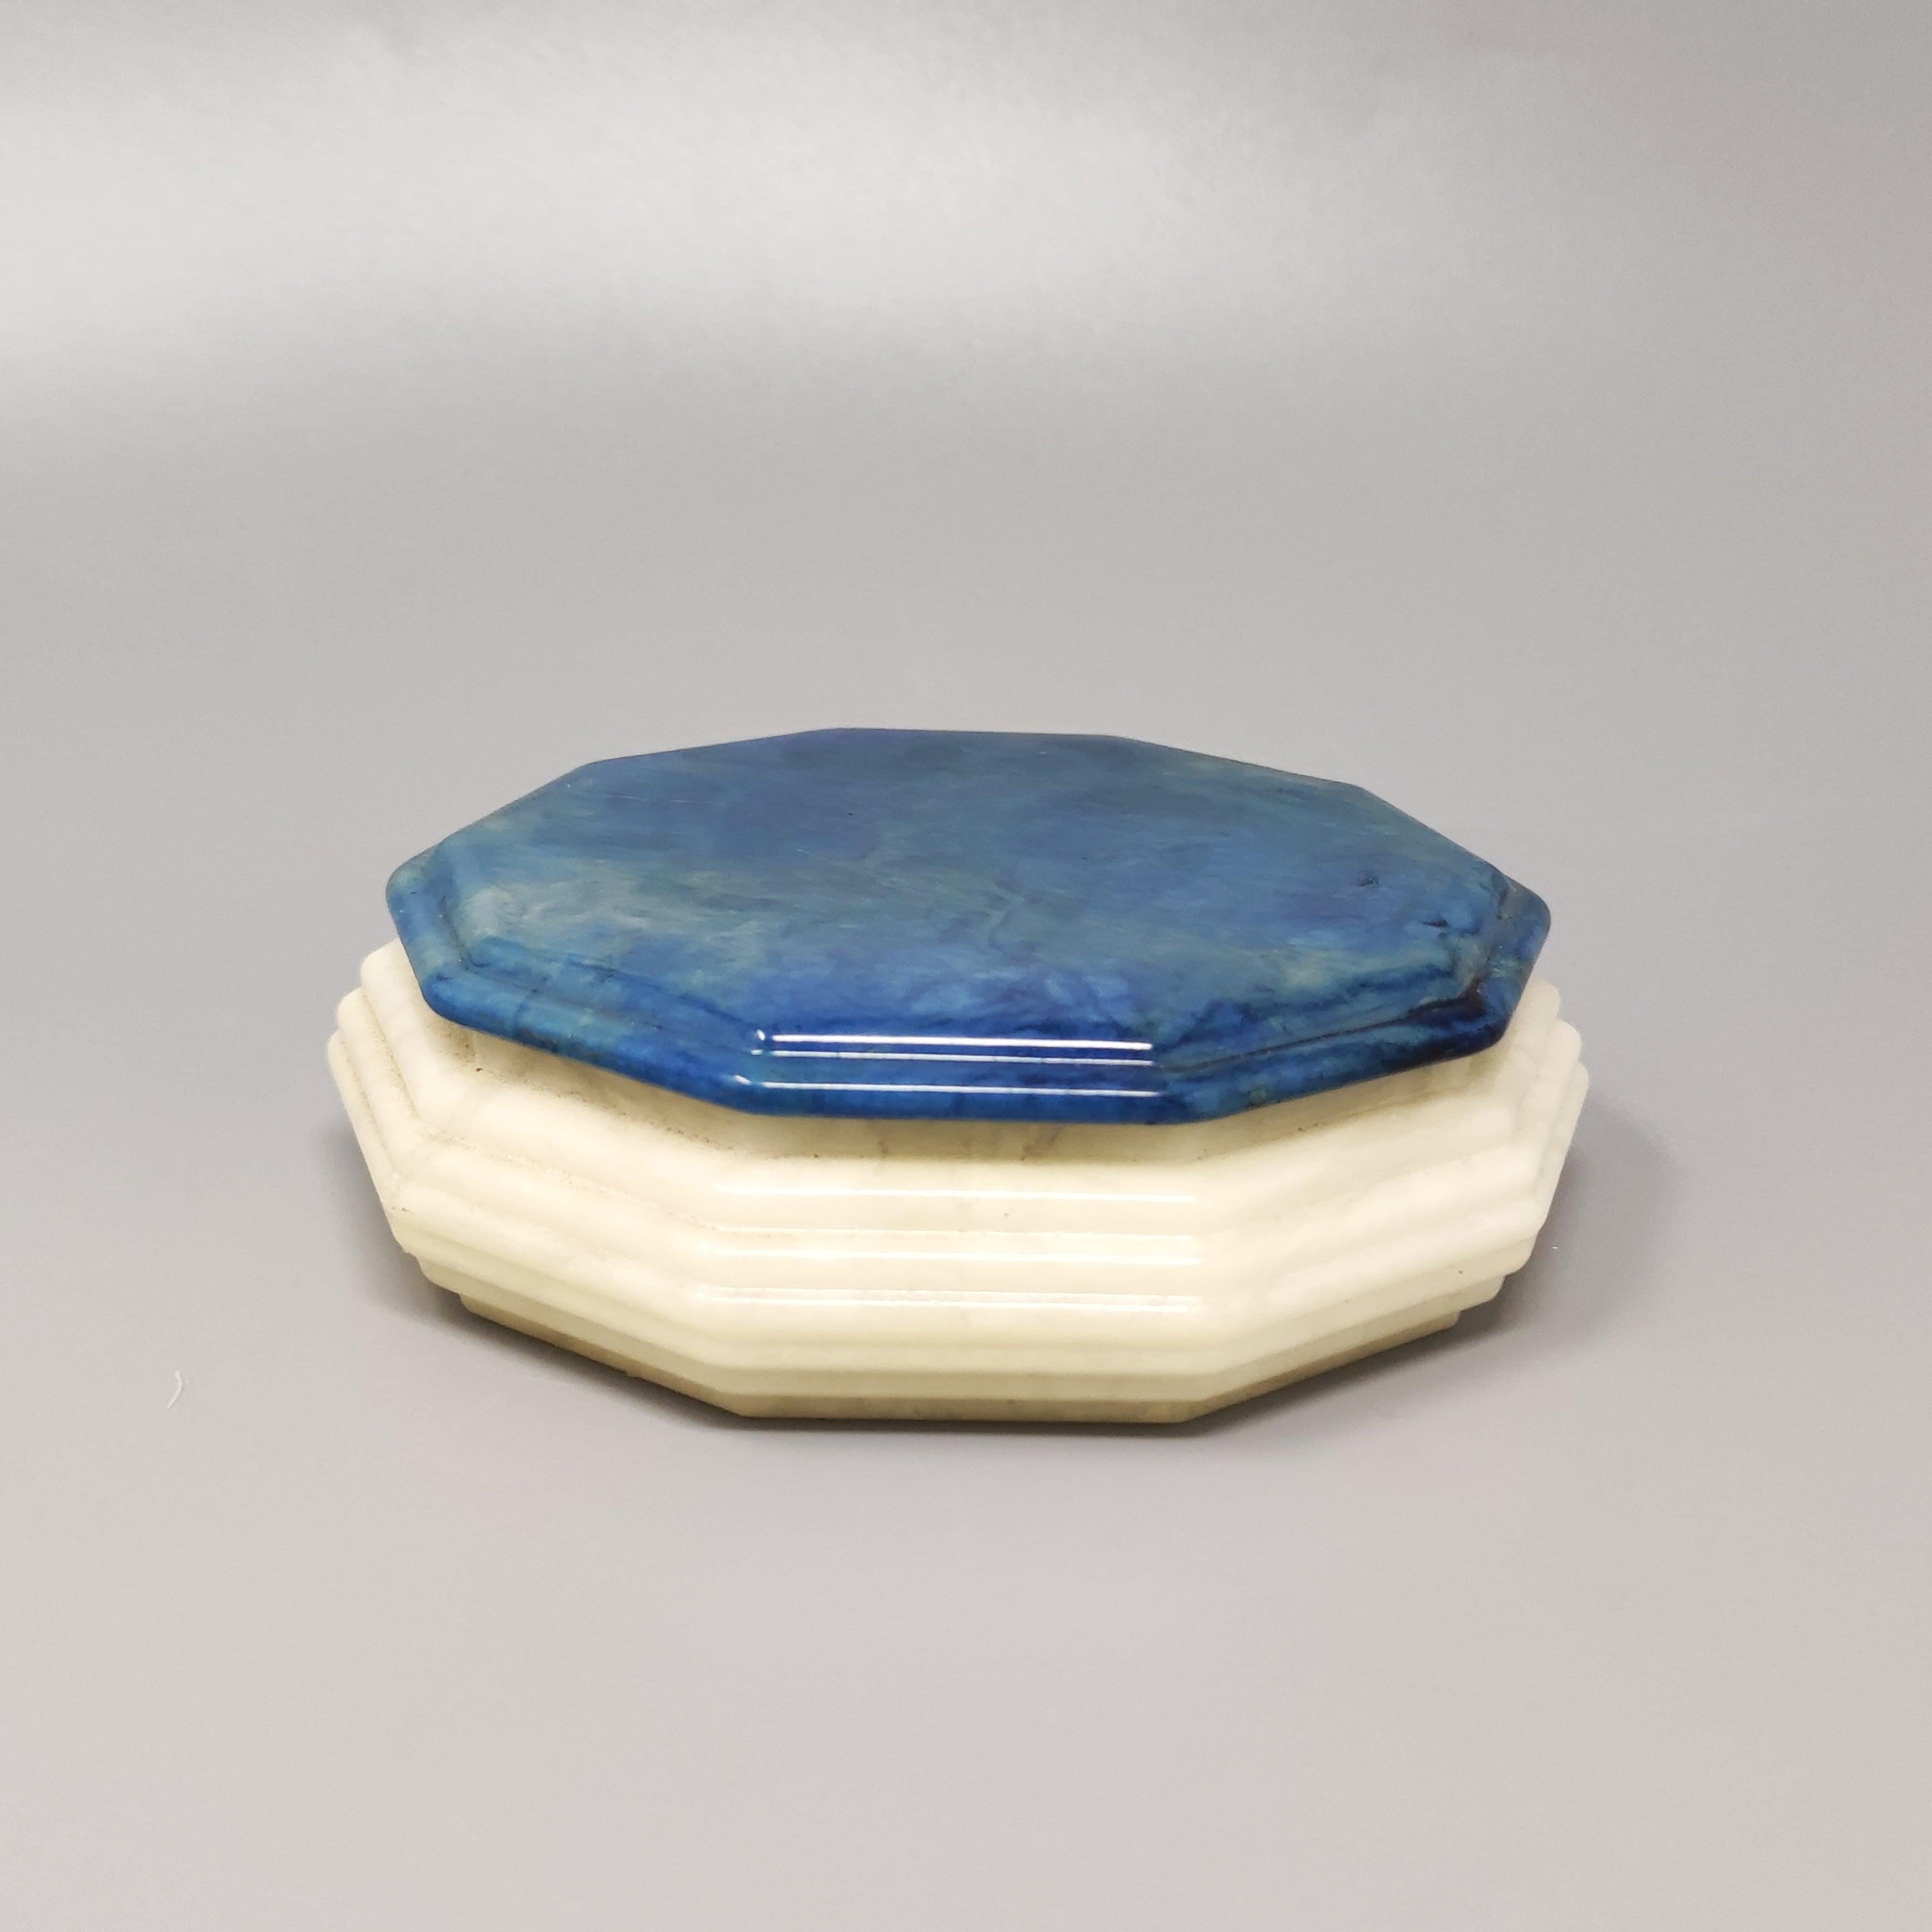 1960s Octagonal blue and white box in alabaster. Made in Italy. This box is in excellent condition.
Dimension:
Diameter 4,72